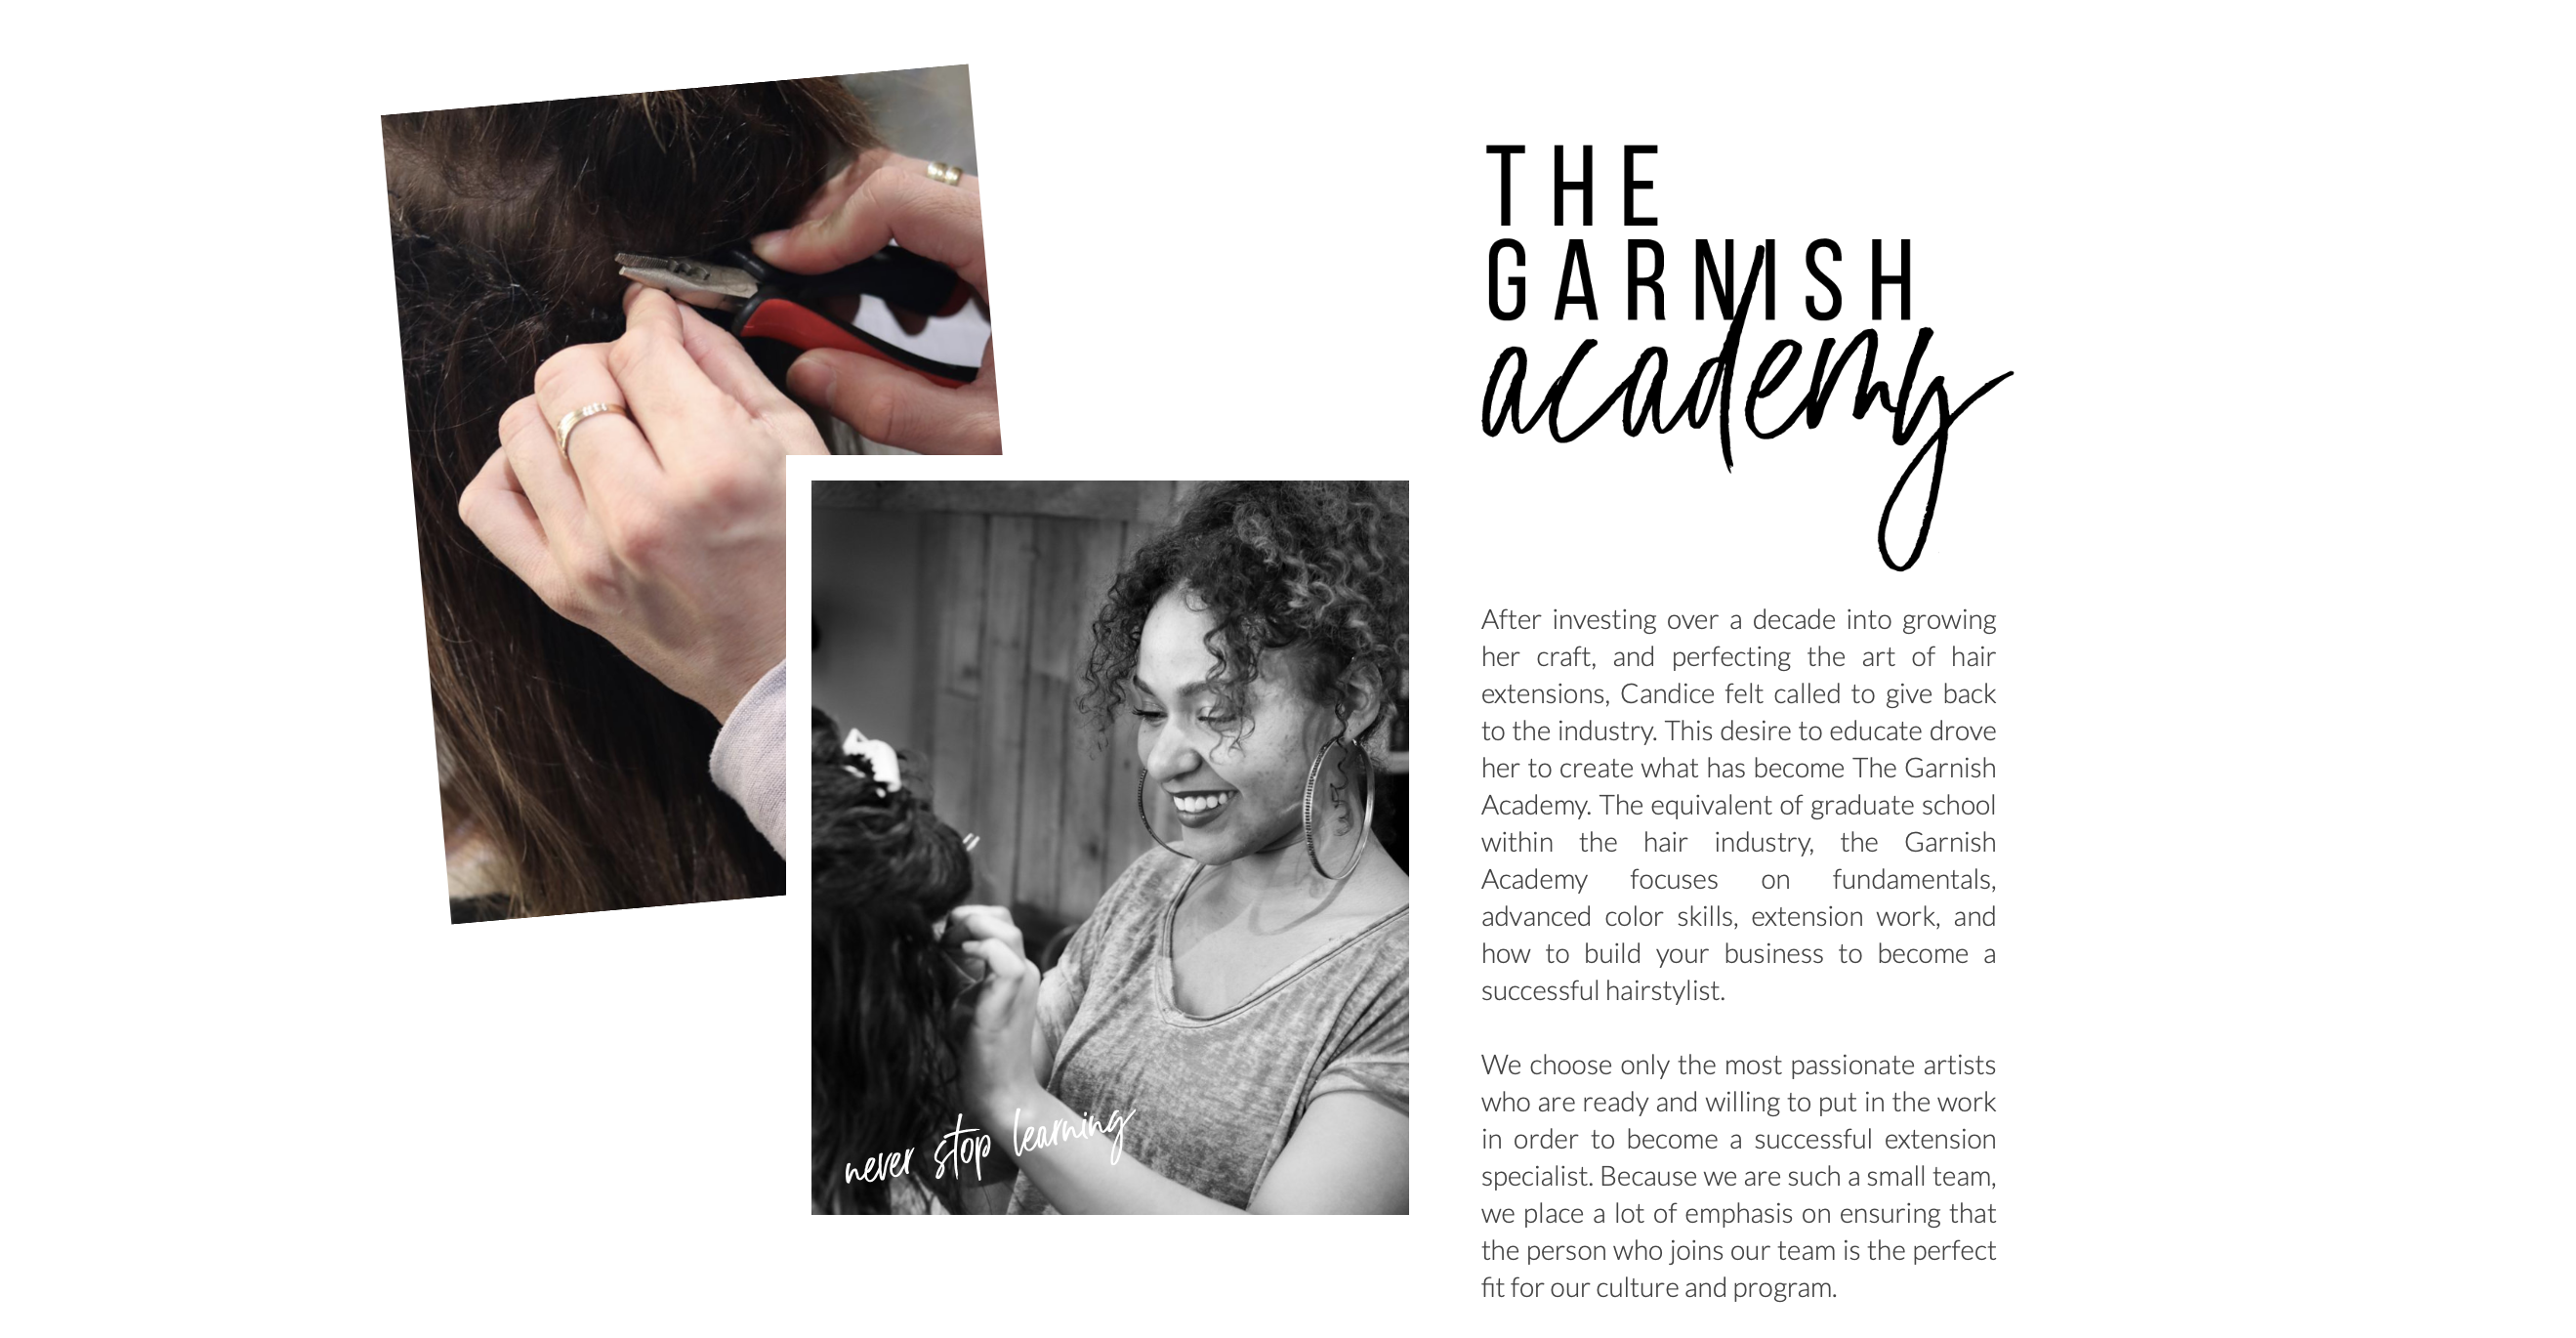 Back to School: The Garnish Extension Academy